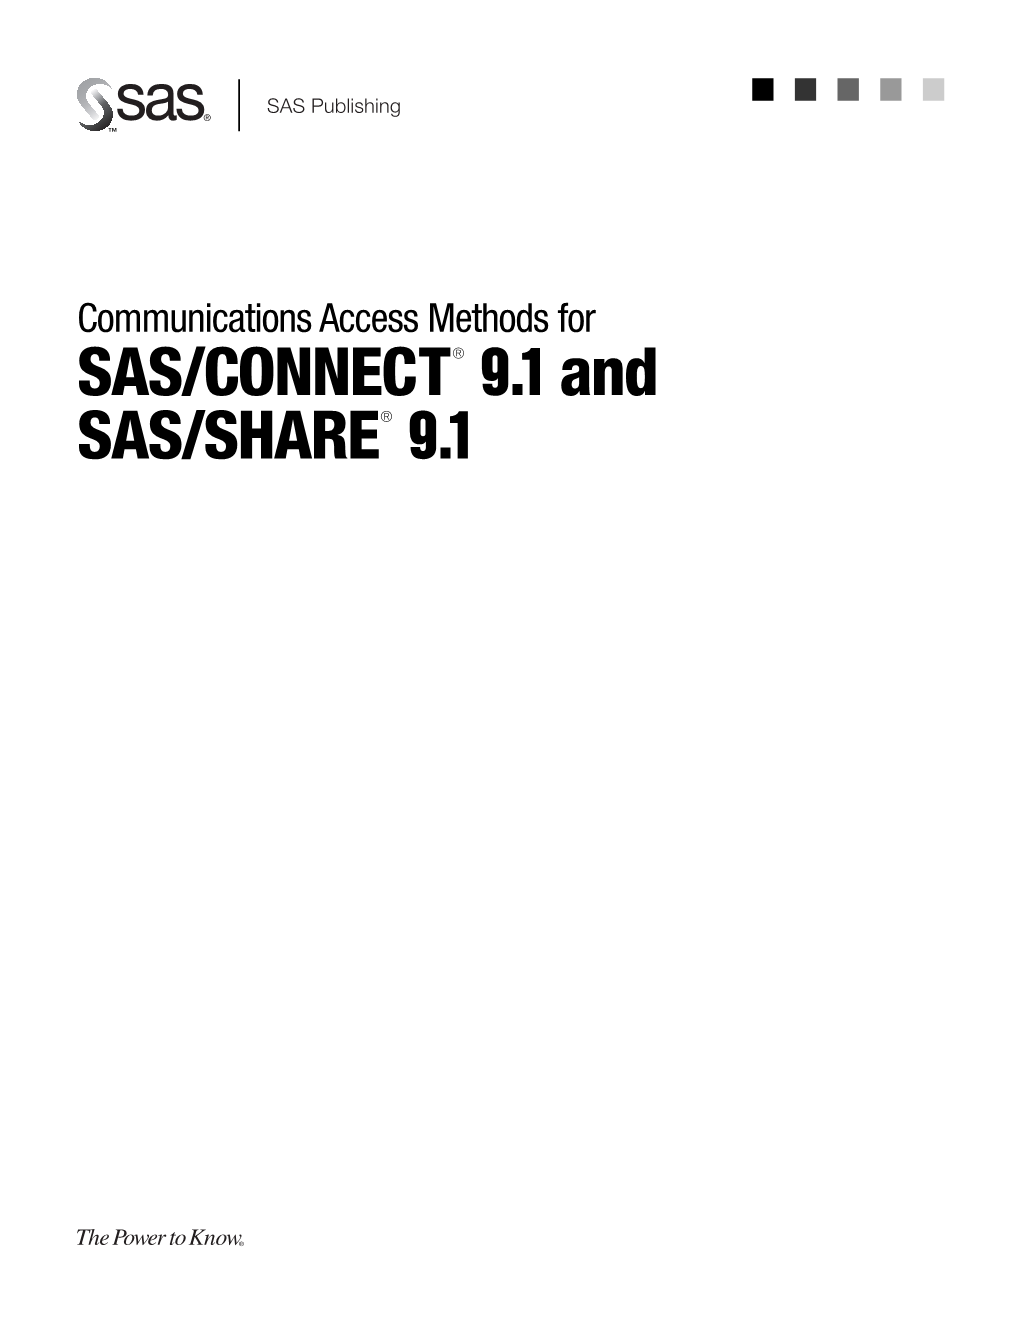 Communications Access Methods for SAS/CONNECT 9.1 and SAS/SHARE 9.1, Please Send Them to Us on a Photocopy of This Page Or Send Us Electronic Mail